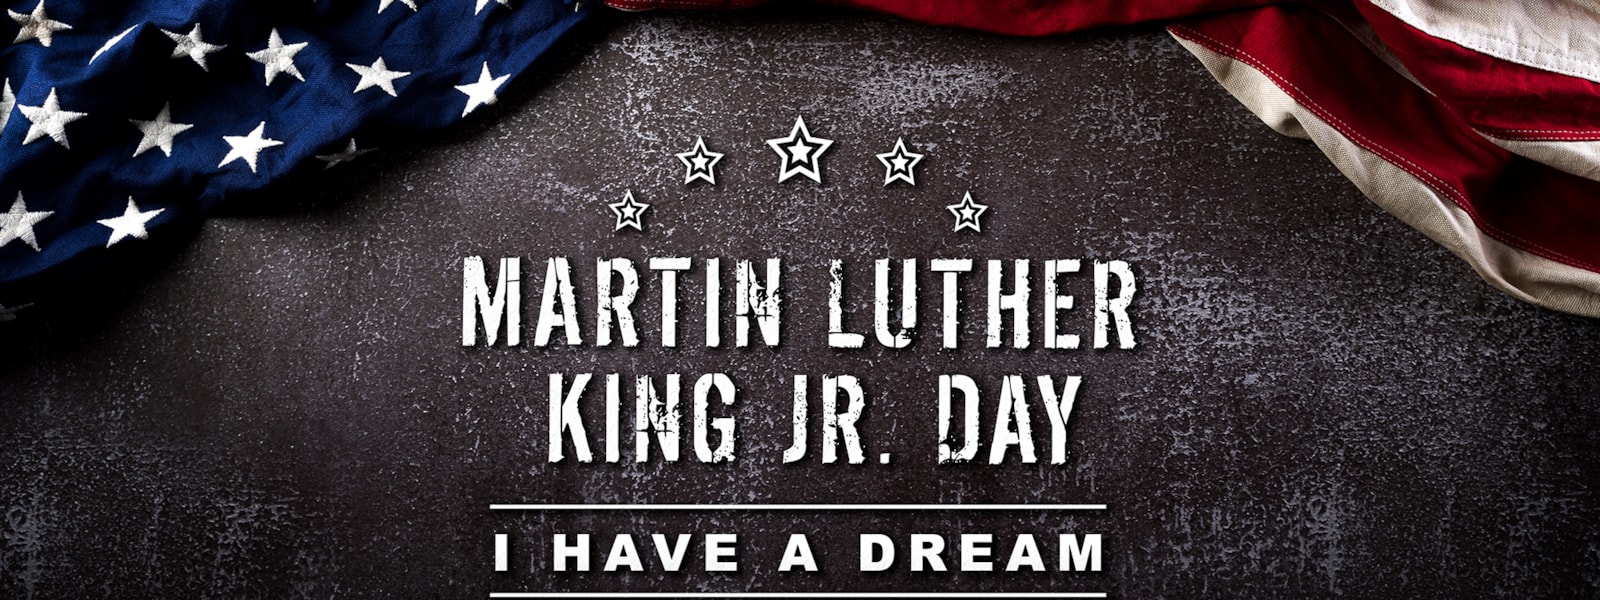 Martin Luther King Jr Day with flag